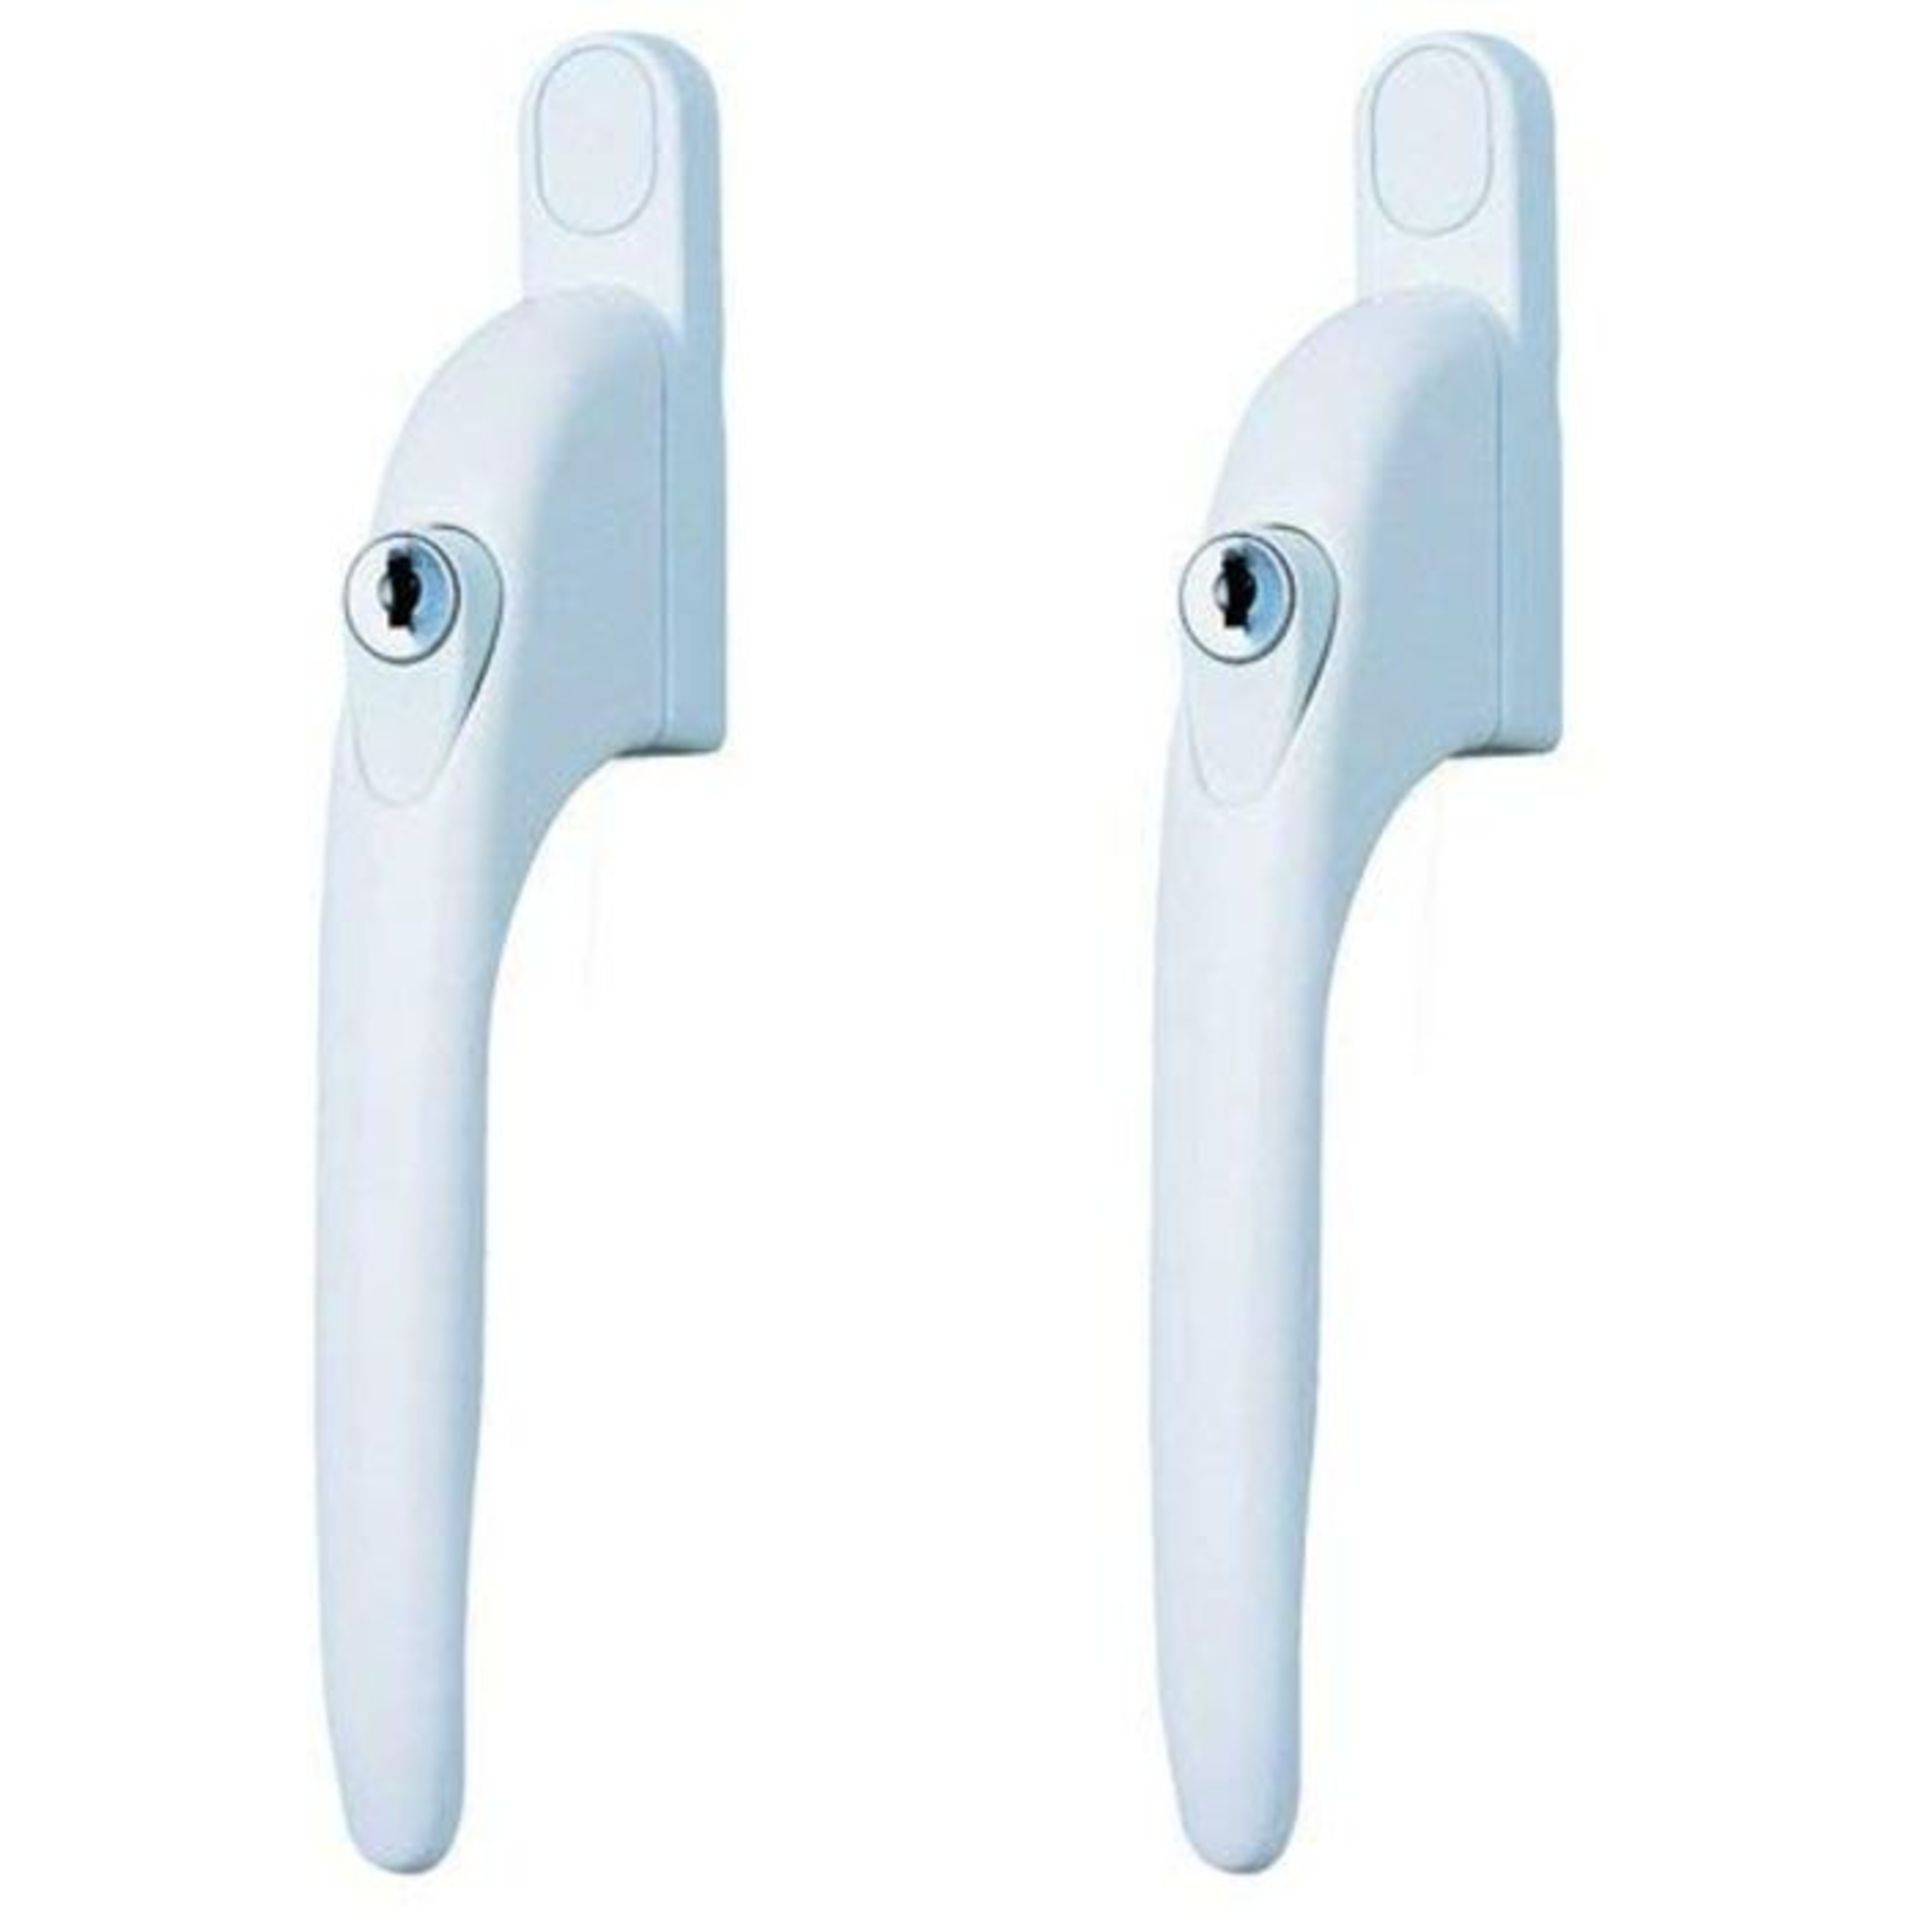 Yale P-2YWHLCK40N-WH Universal Window Handles, fits Right or Left Handed windows, 40mm